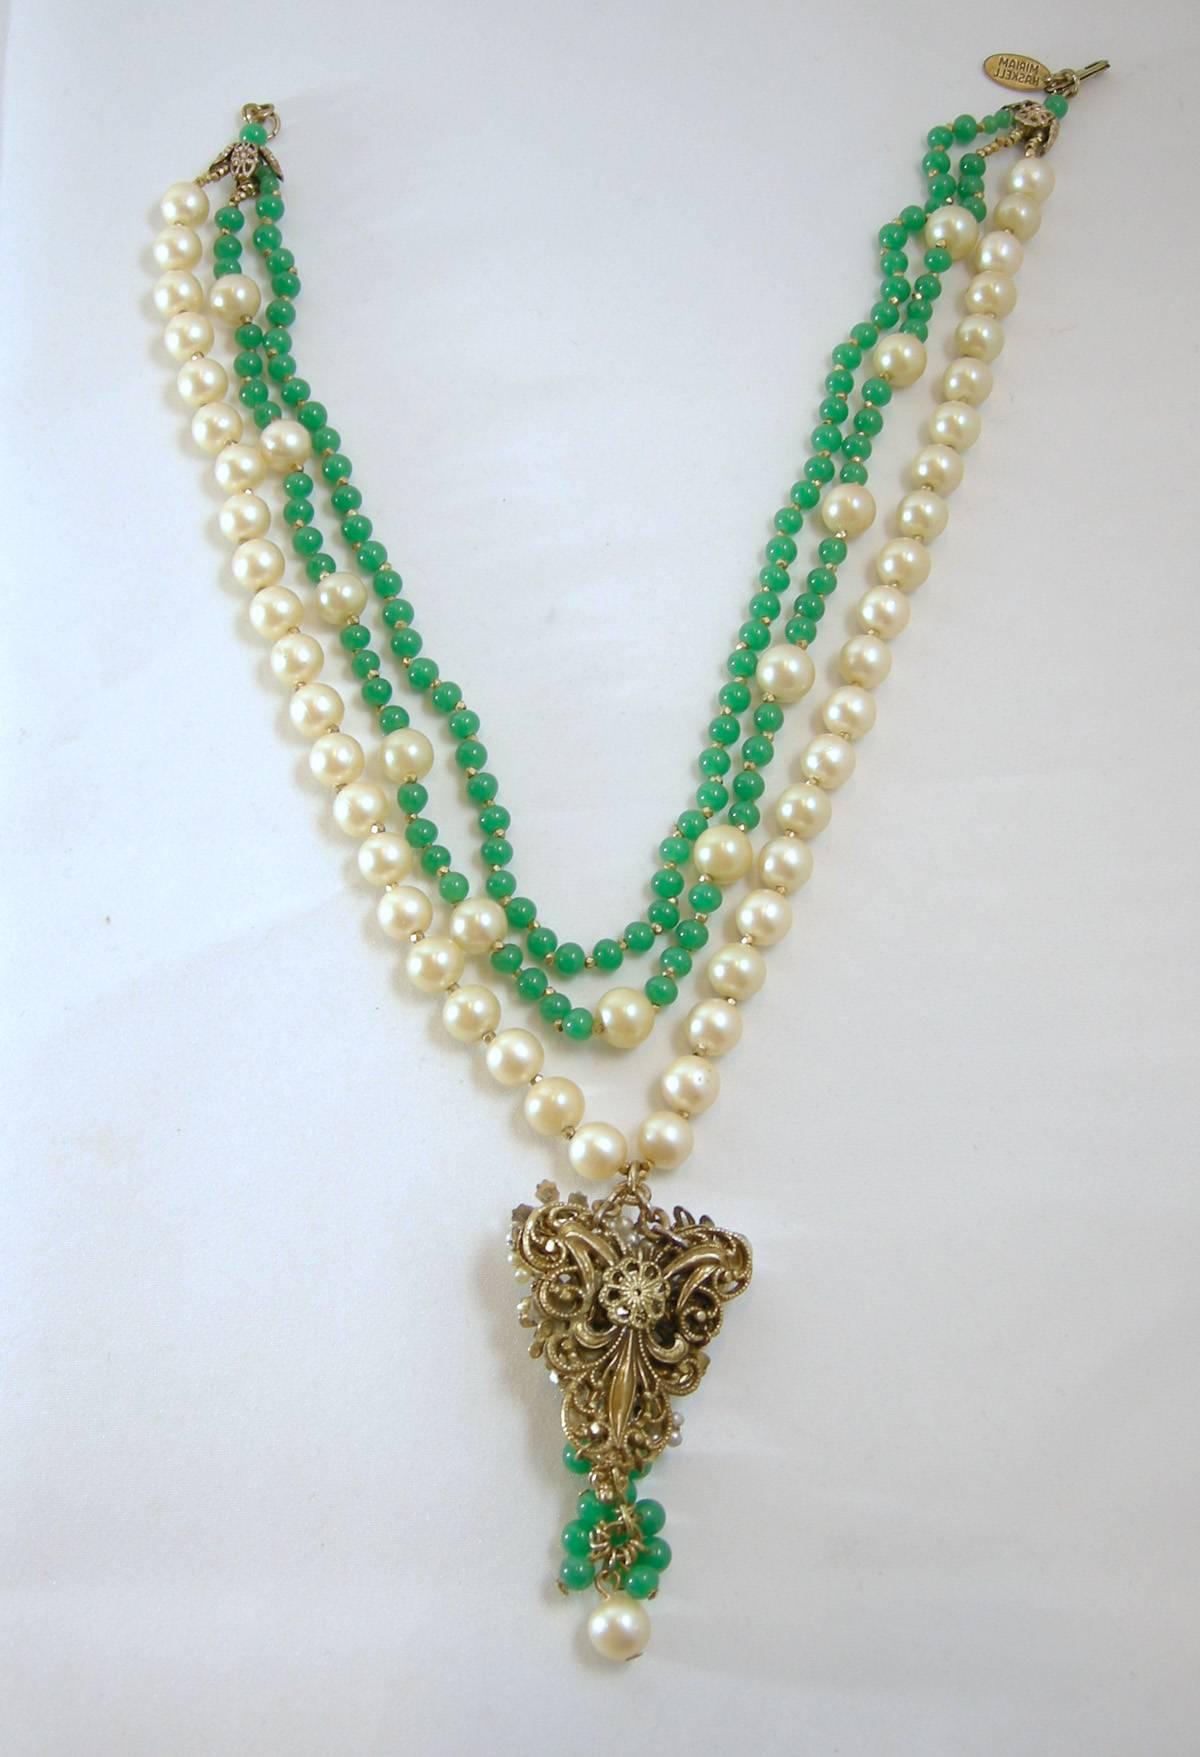 Vintage Signed Miriam Haskell 3-Strand Faux Pearl & Green Glass Bead Necklace In Excellent Condition For Sale In New York, NY